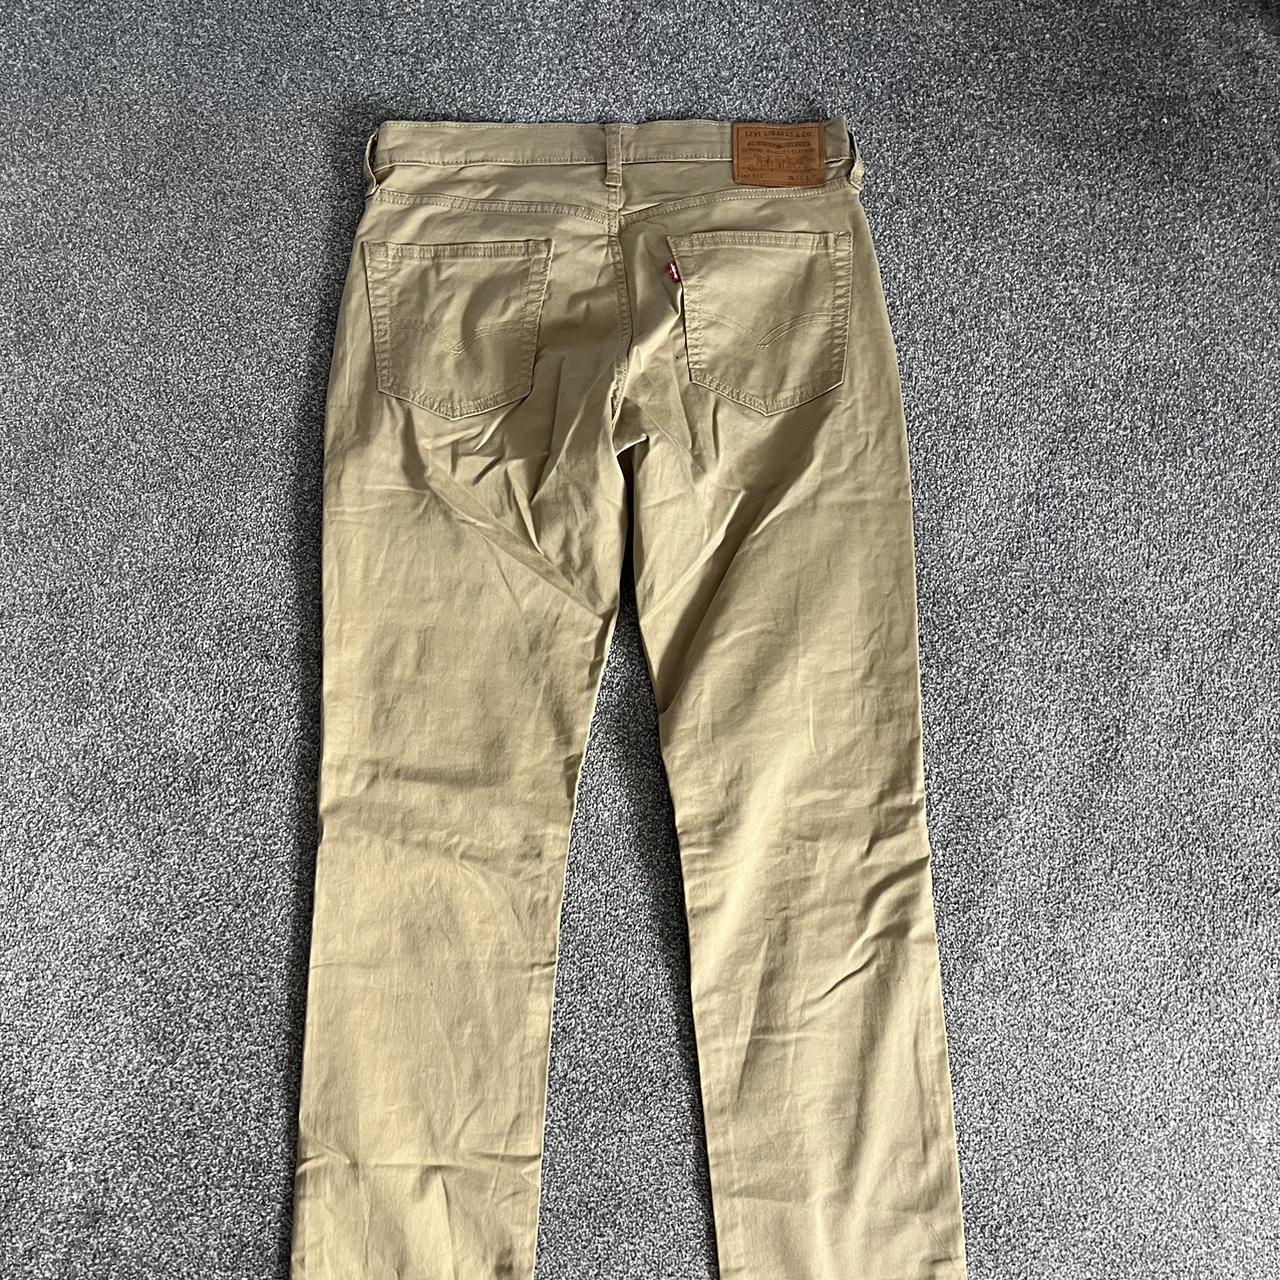 Brand new 511 chino Levi’s without labels - Depop